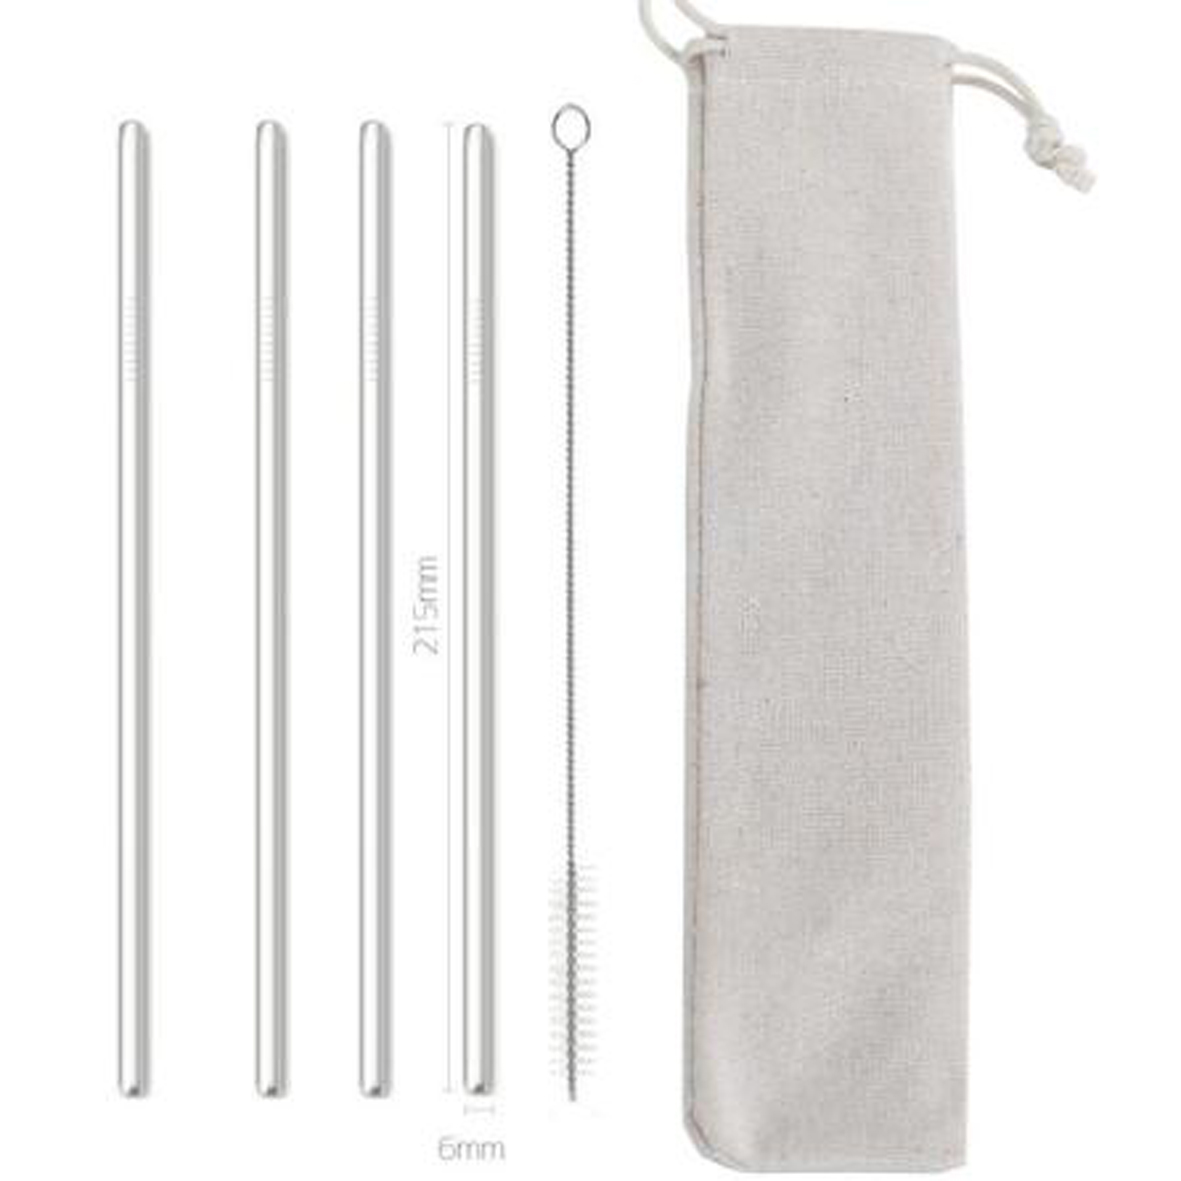 GL-ELY1253 5 in 1 Straight Metal Straw Set with White Carrying Pouch